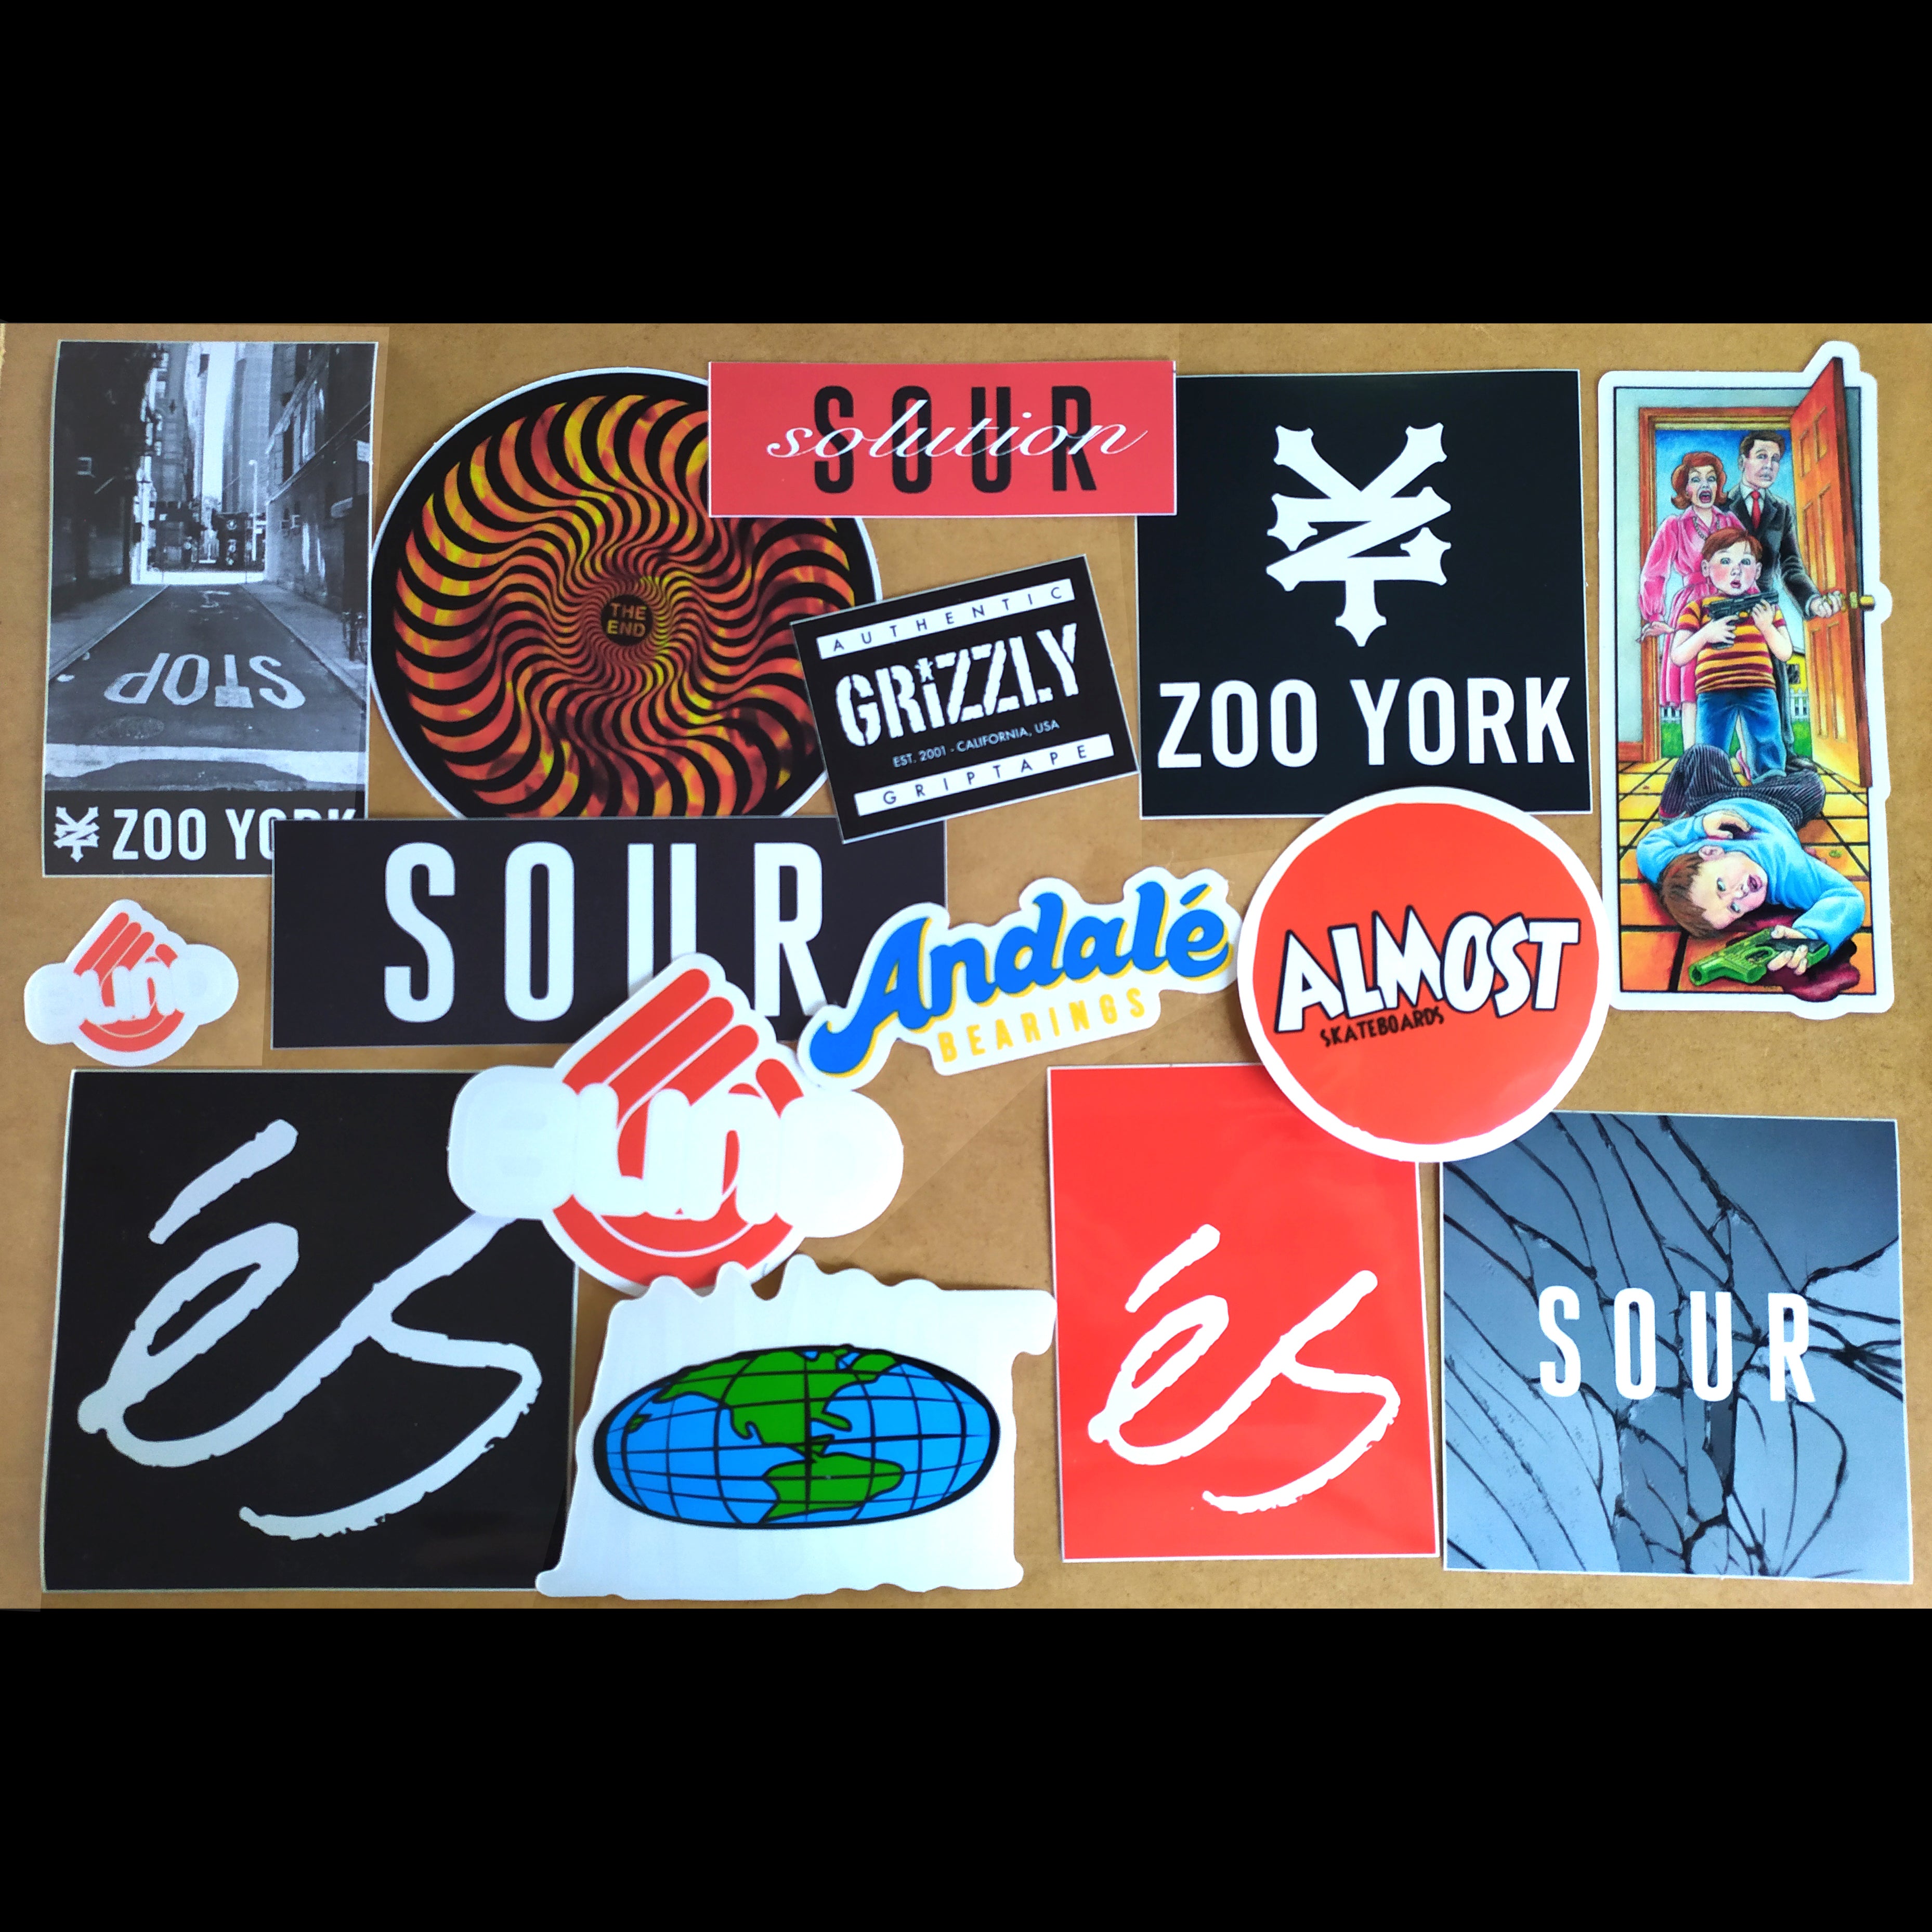 Bargain Sticker Pack - 15 Stickers from Andale, Almost, Blind, Grizzly, 'eS, Sour, Spitfire & Zoo York!